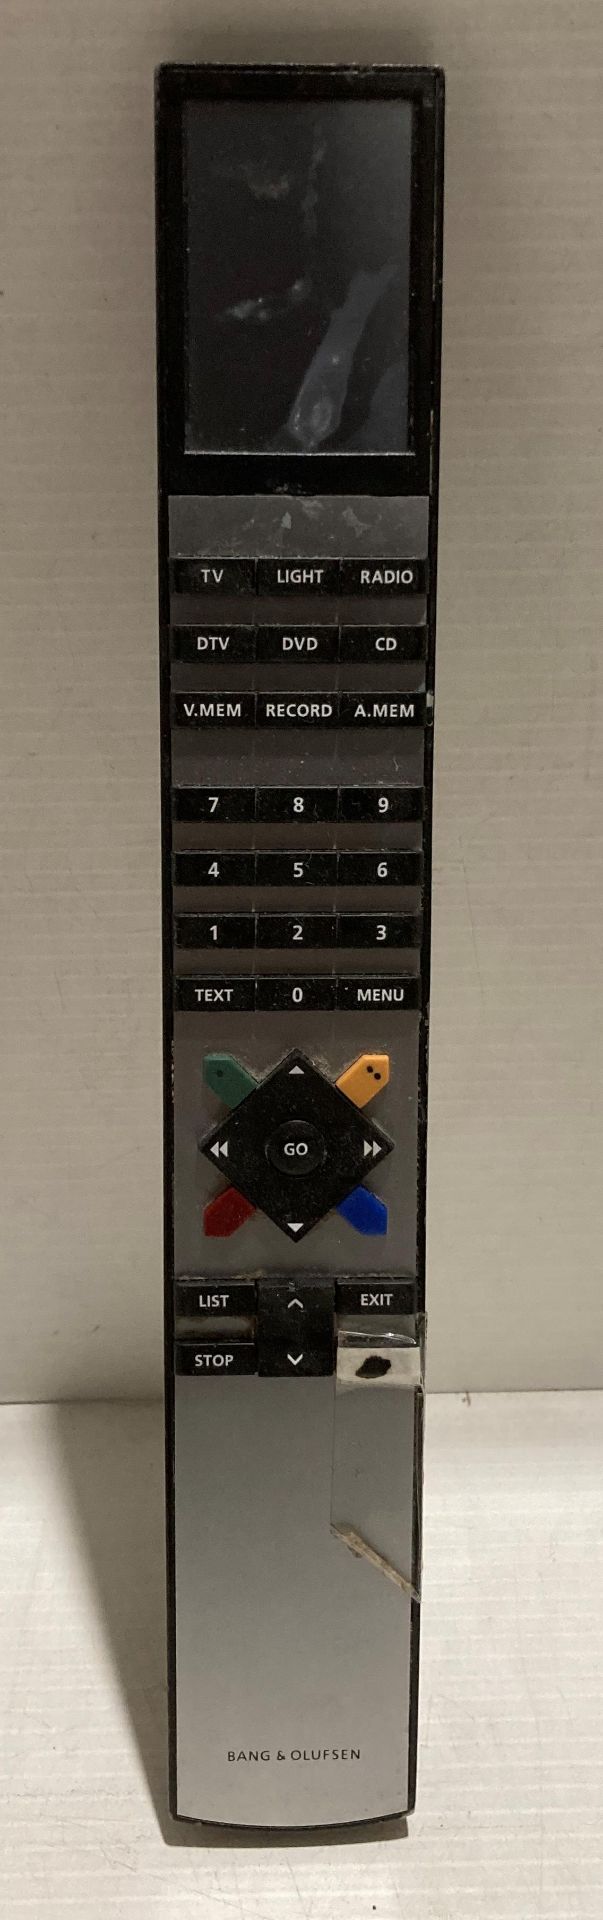 Bang & Olufsen remote control (cracked) together with leads and manuals (Saleroom location: S2) - Image 2 of 3